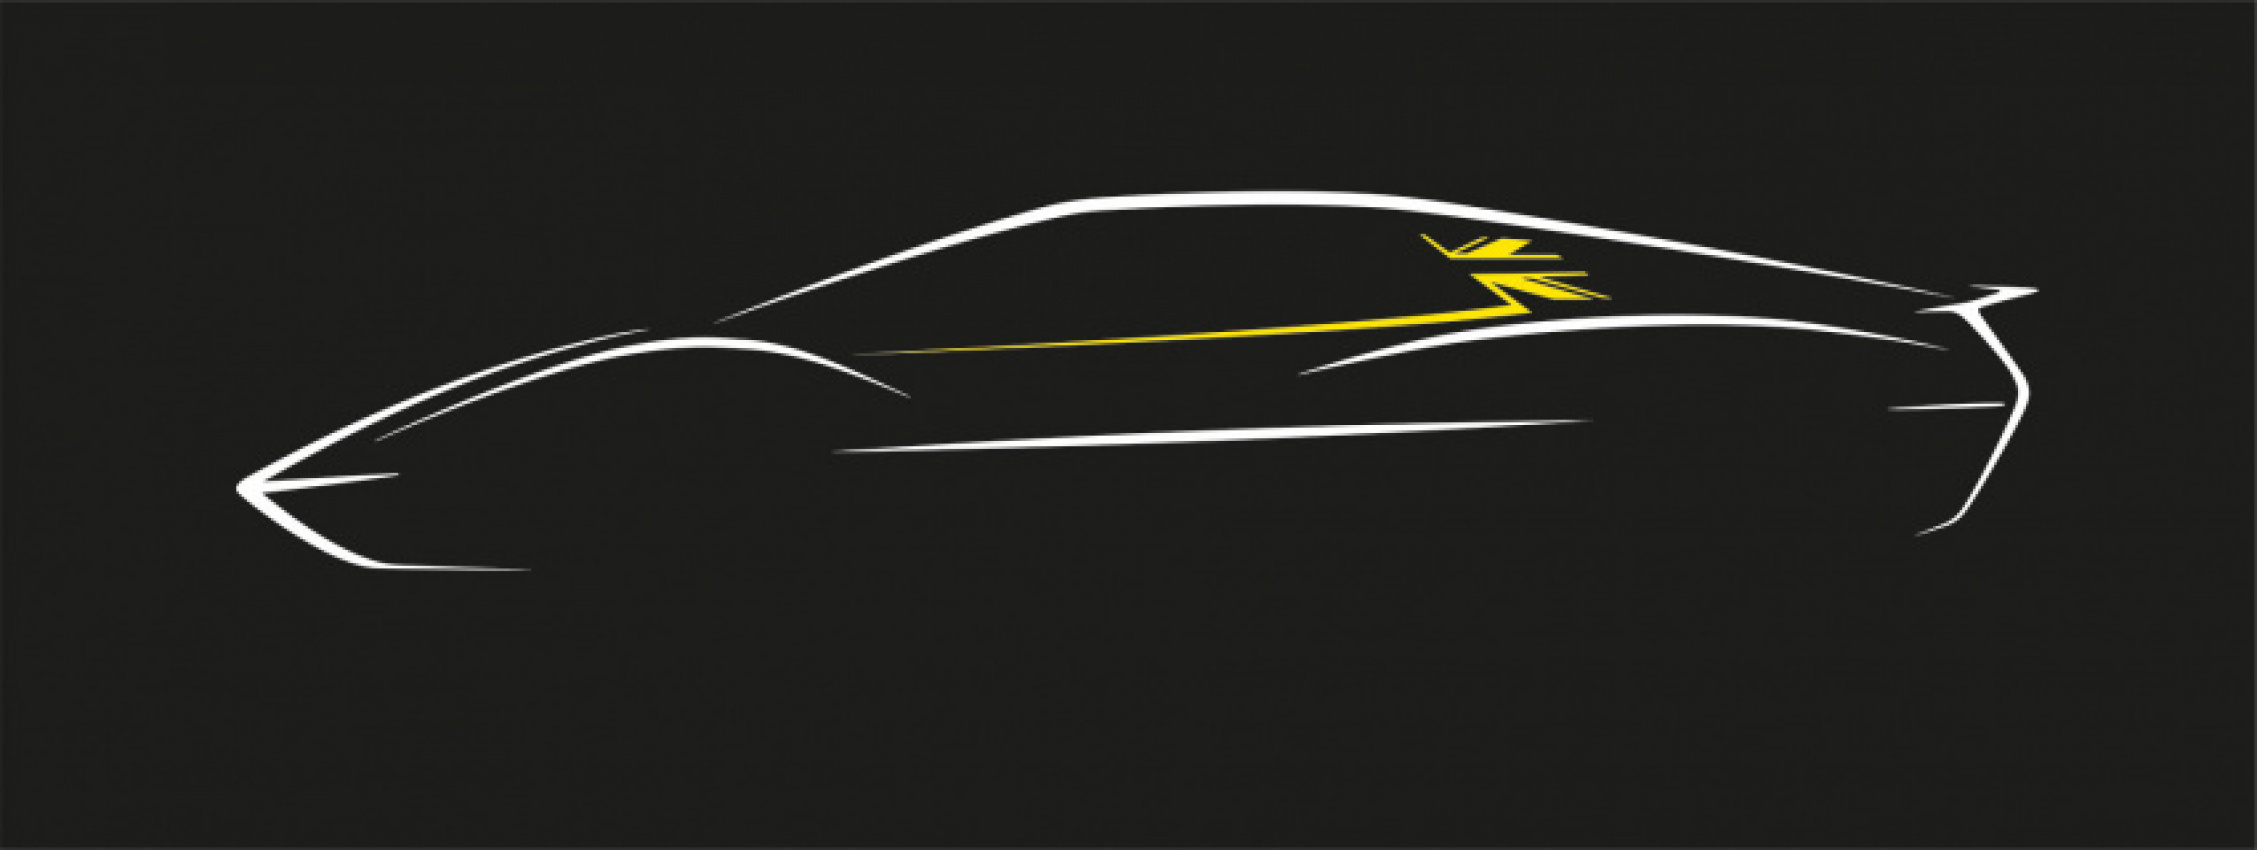 autos, cars, lotus, news, battery, electric vehicles, teaser, tech, lotus to develop batteries with britishvolt, teases new electric sports car